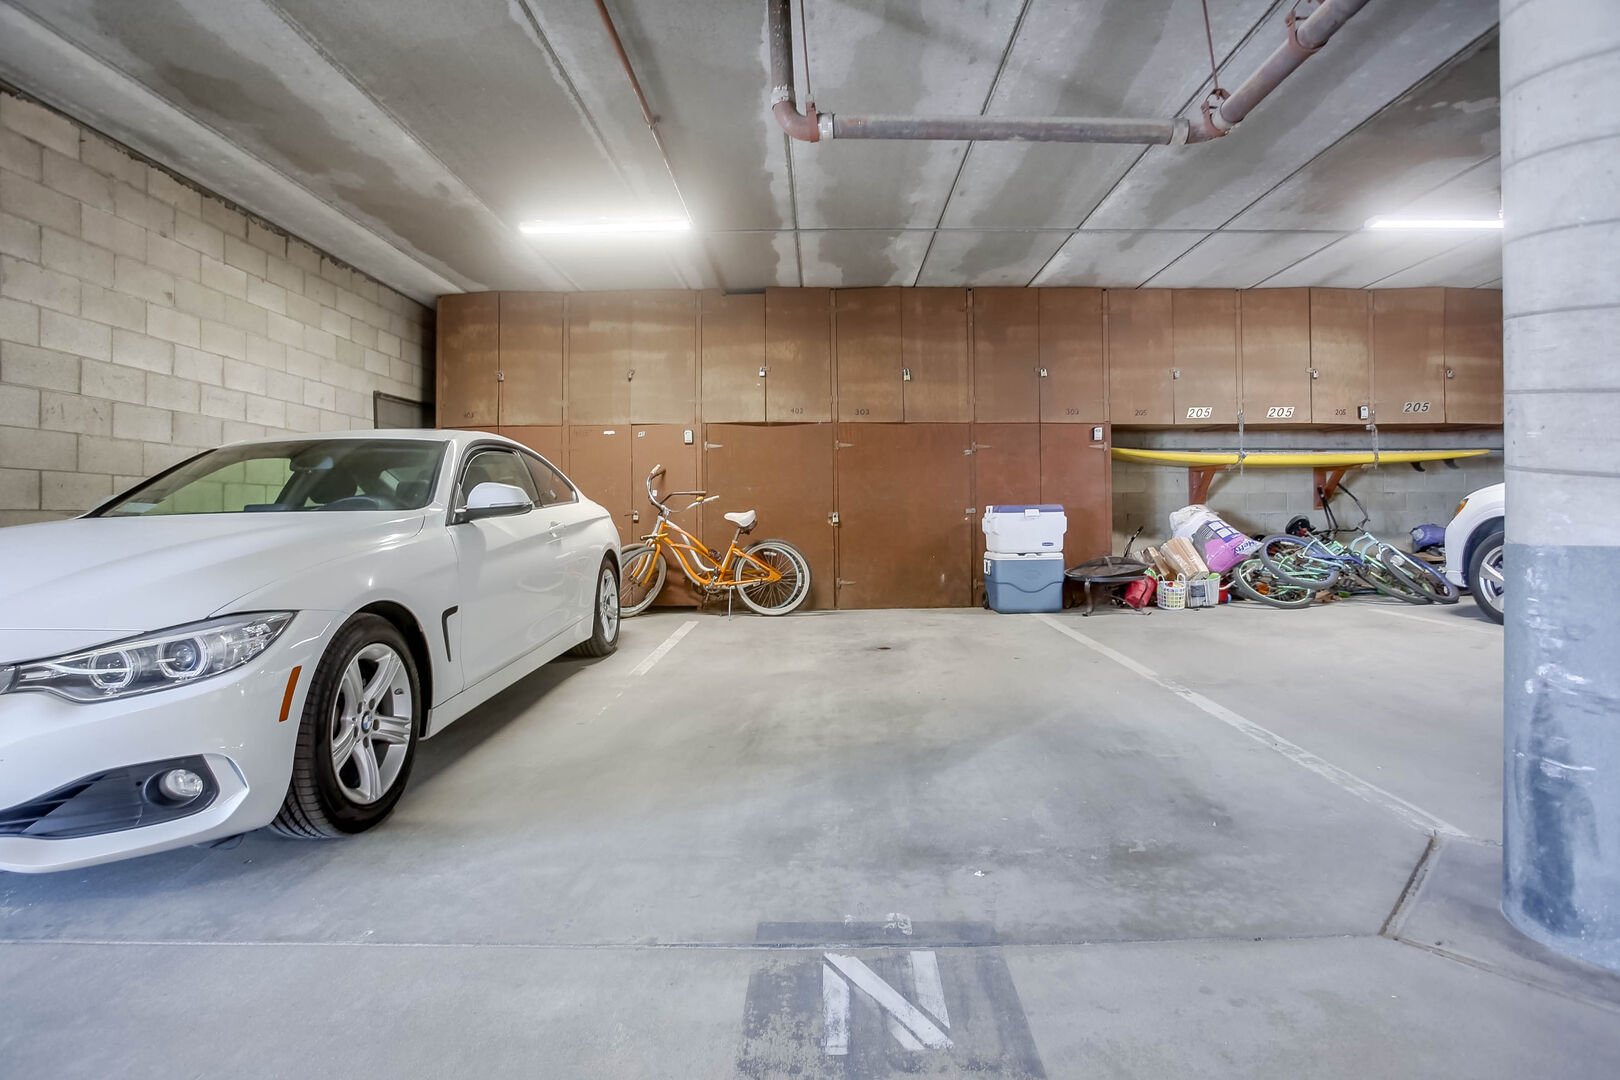 Reserved parking space in the garage